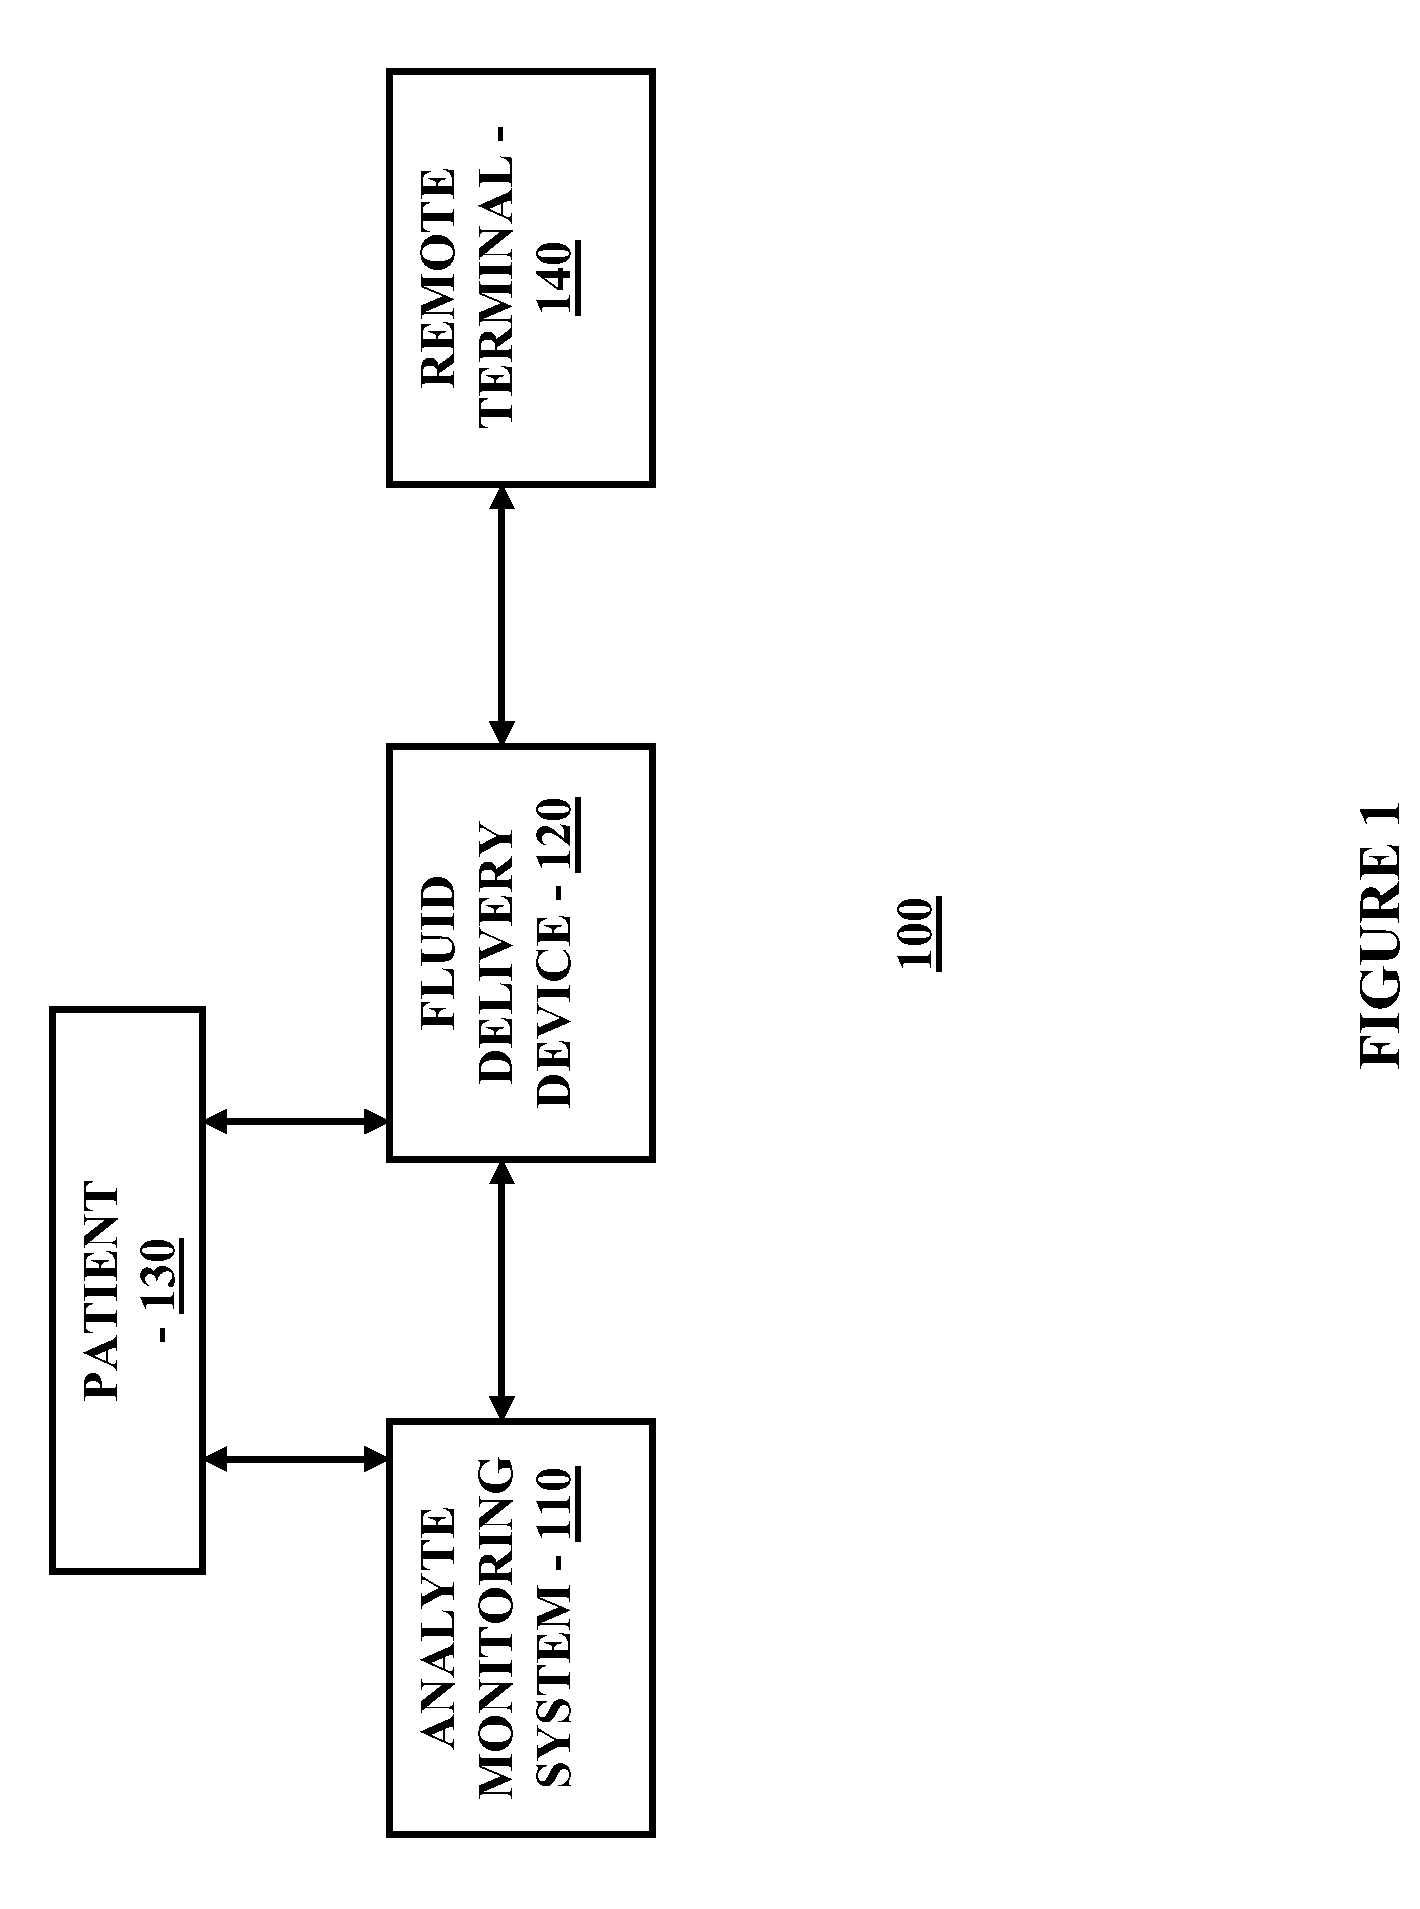 Method and system for providing data management in integrated analyte monitoring and infusion system